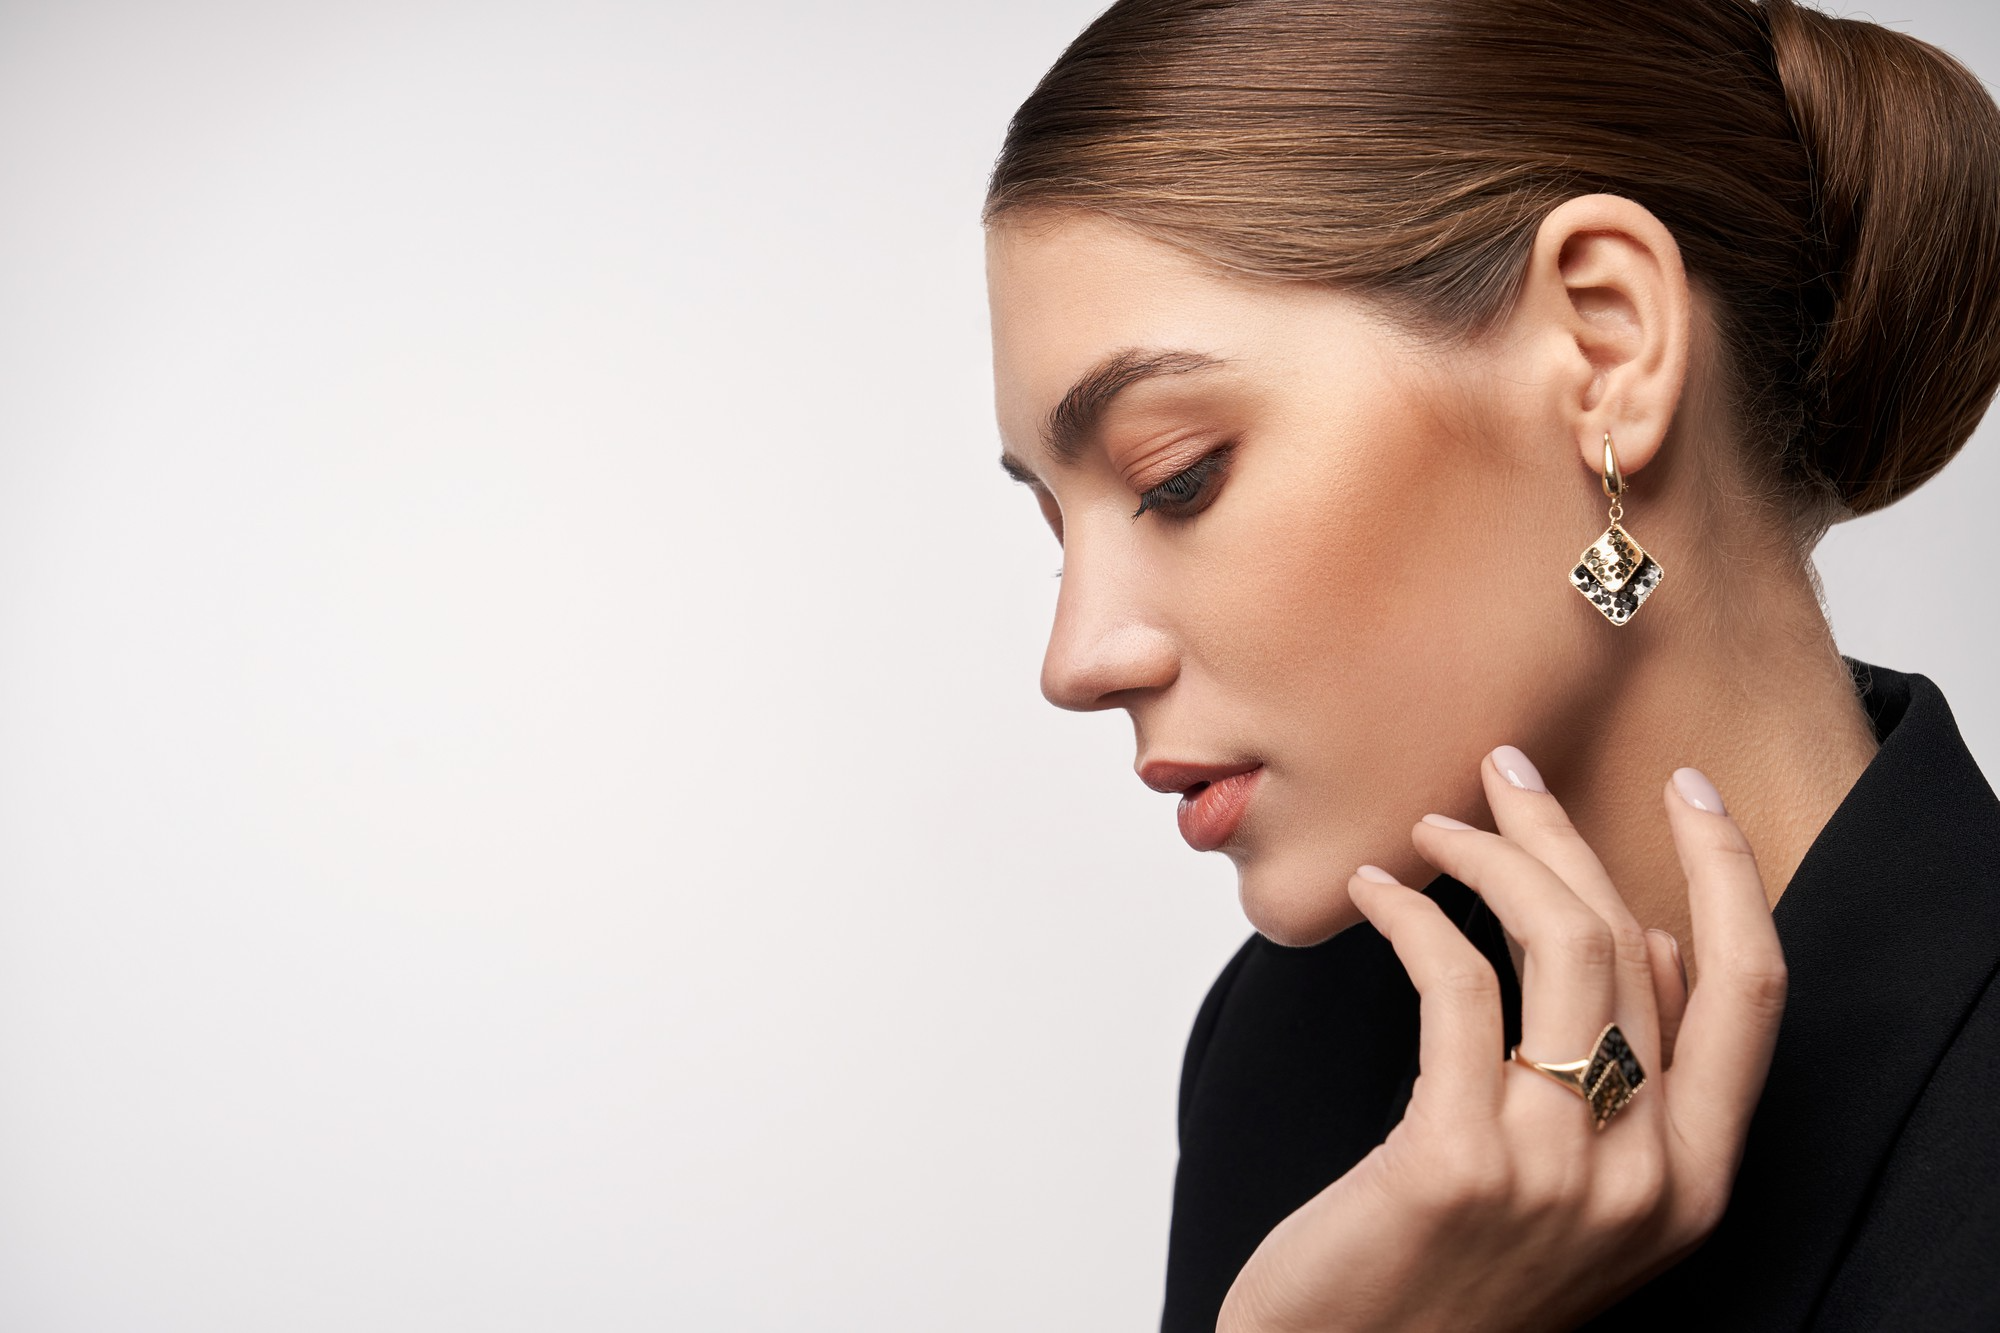 Close-up of a woman wearing professionally retouched jewelry.